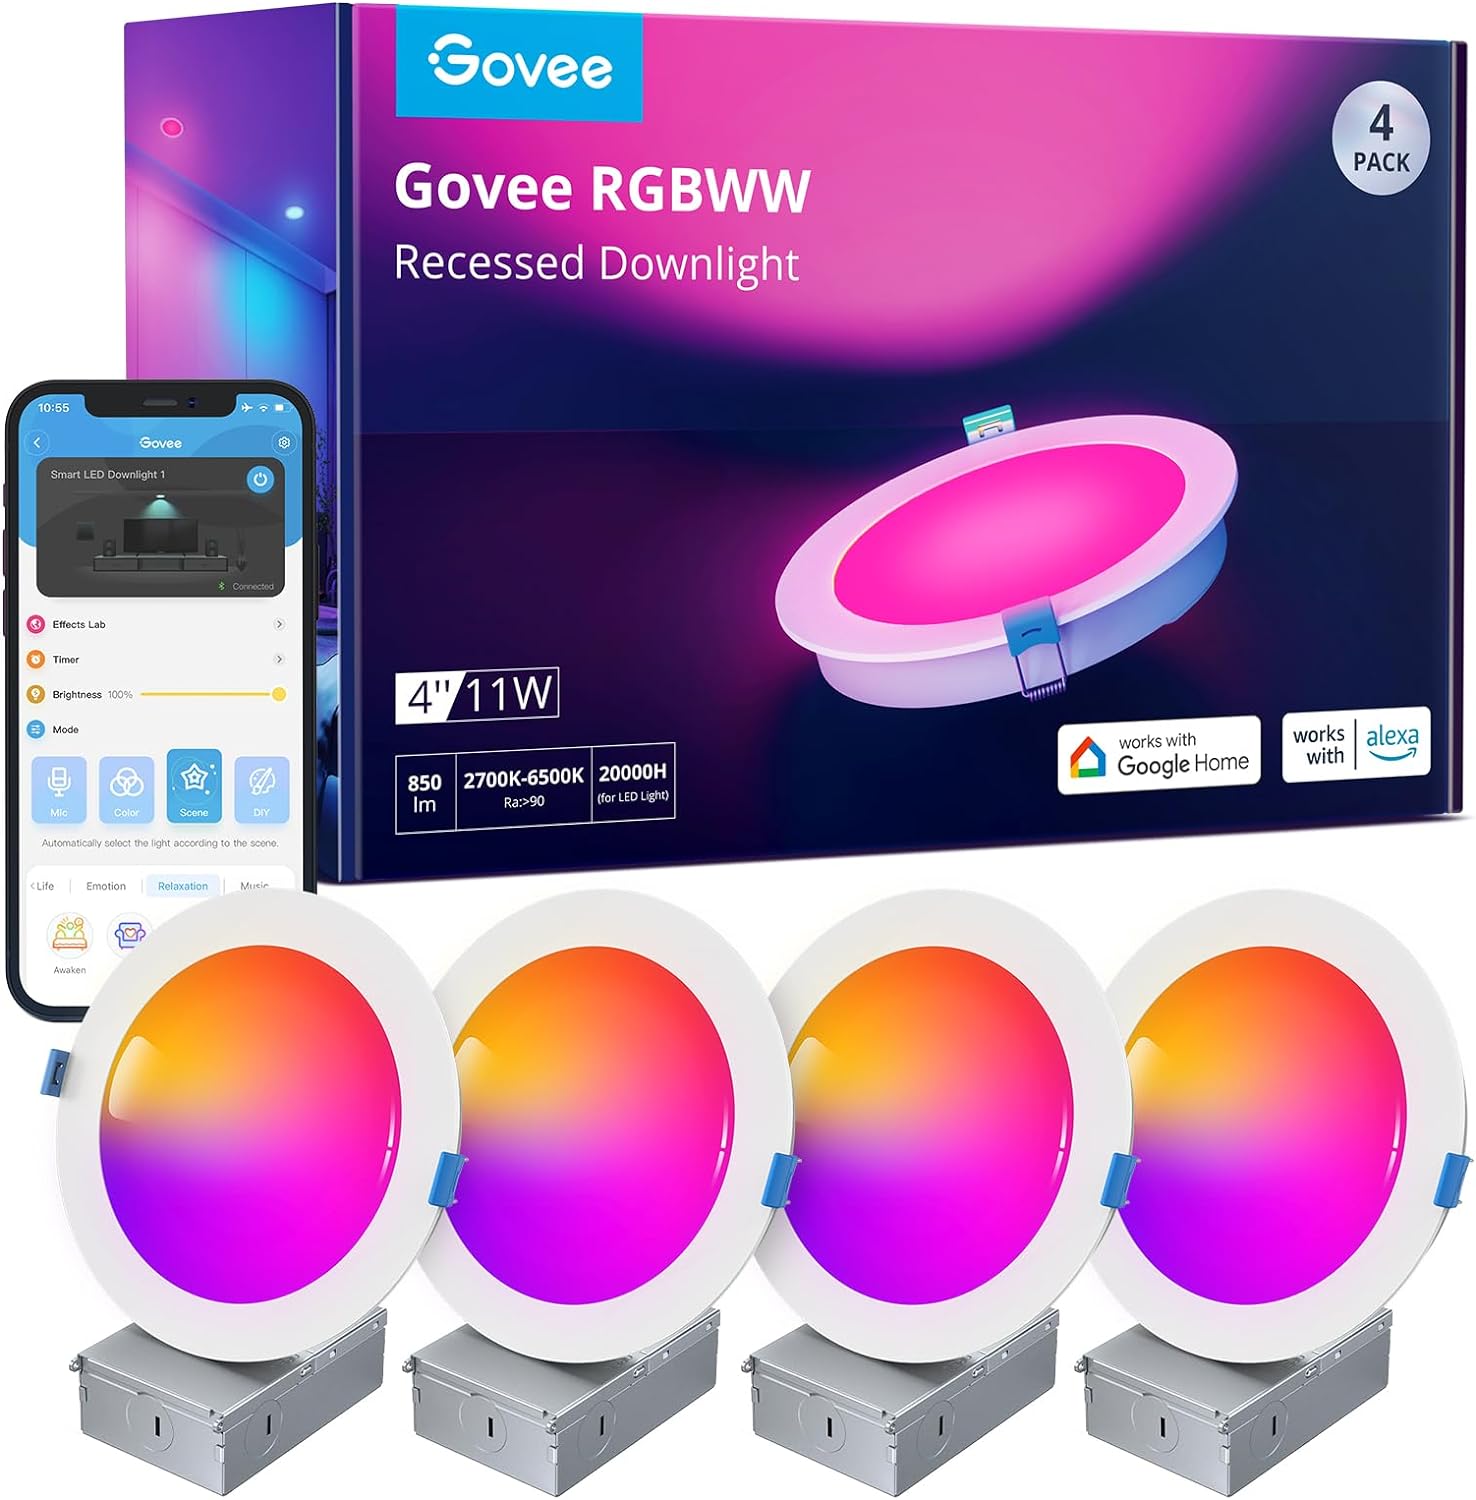 Govee Smart WiFi RGBWW LED Recessed Lighting, 65 Modes, Works with Alexa & Google Assistant, 850 Lumen, 4 Pack